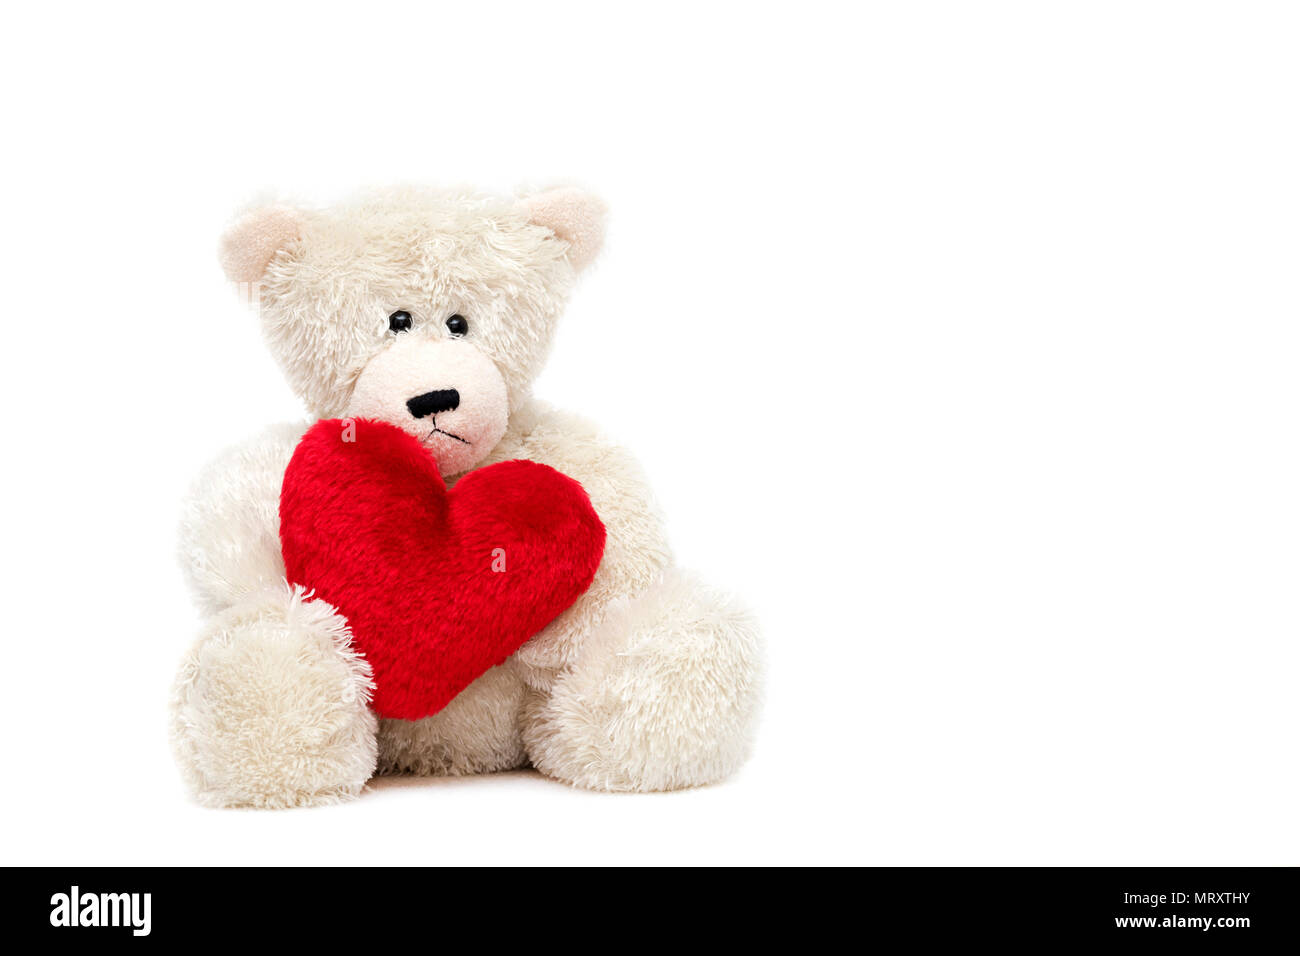 Teddy bear with red heart. Stock Photo